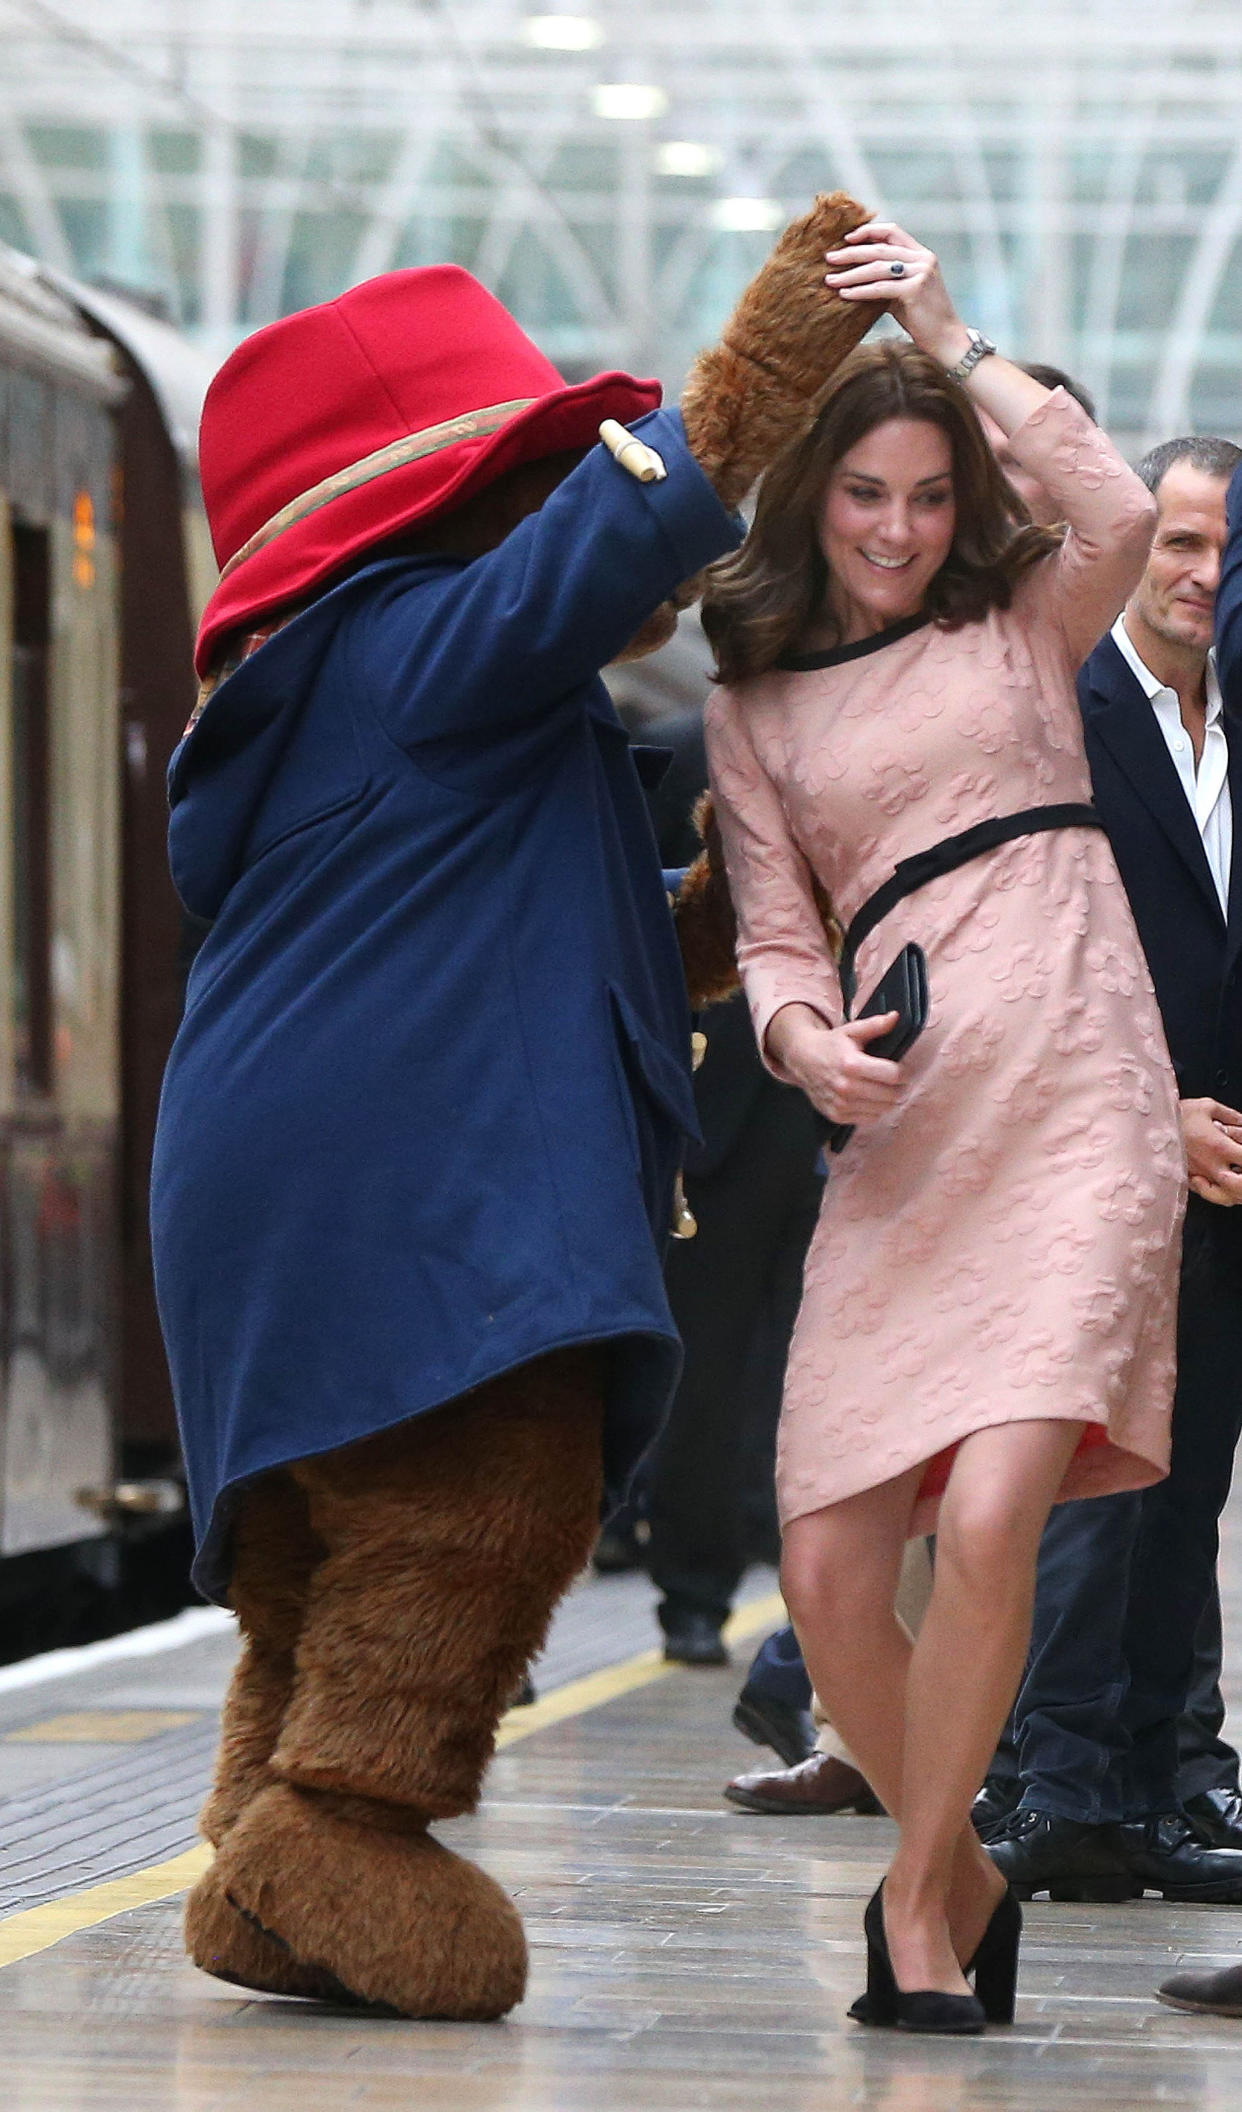 The Duchess of Cambridge dances with a costumed figure of Paddington bear on platform 1 at Paddington Station, London, as she attends the Charities Forum event, joining children from the charities she supports and to meet the cast and crew from the forthcoming film Paddington 2.